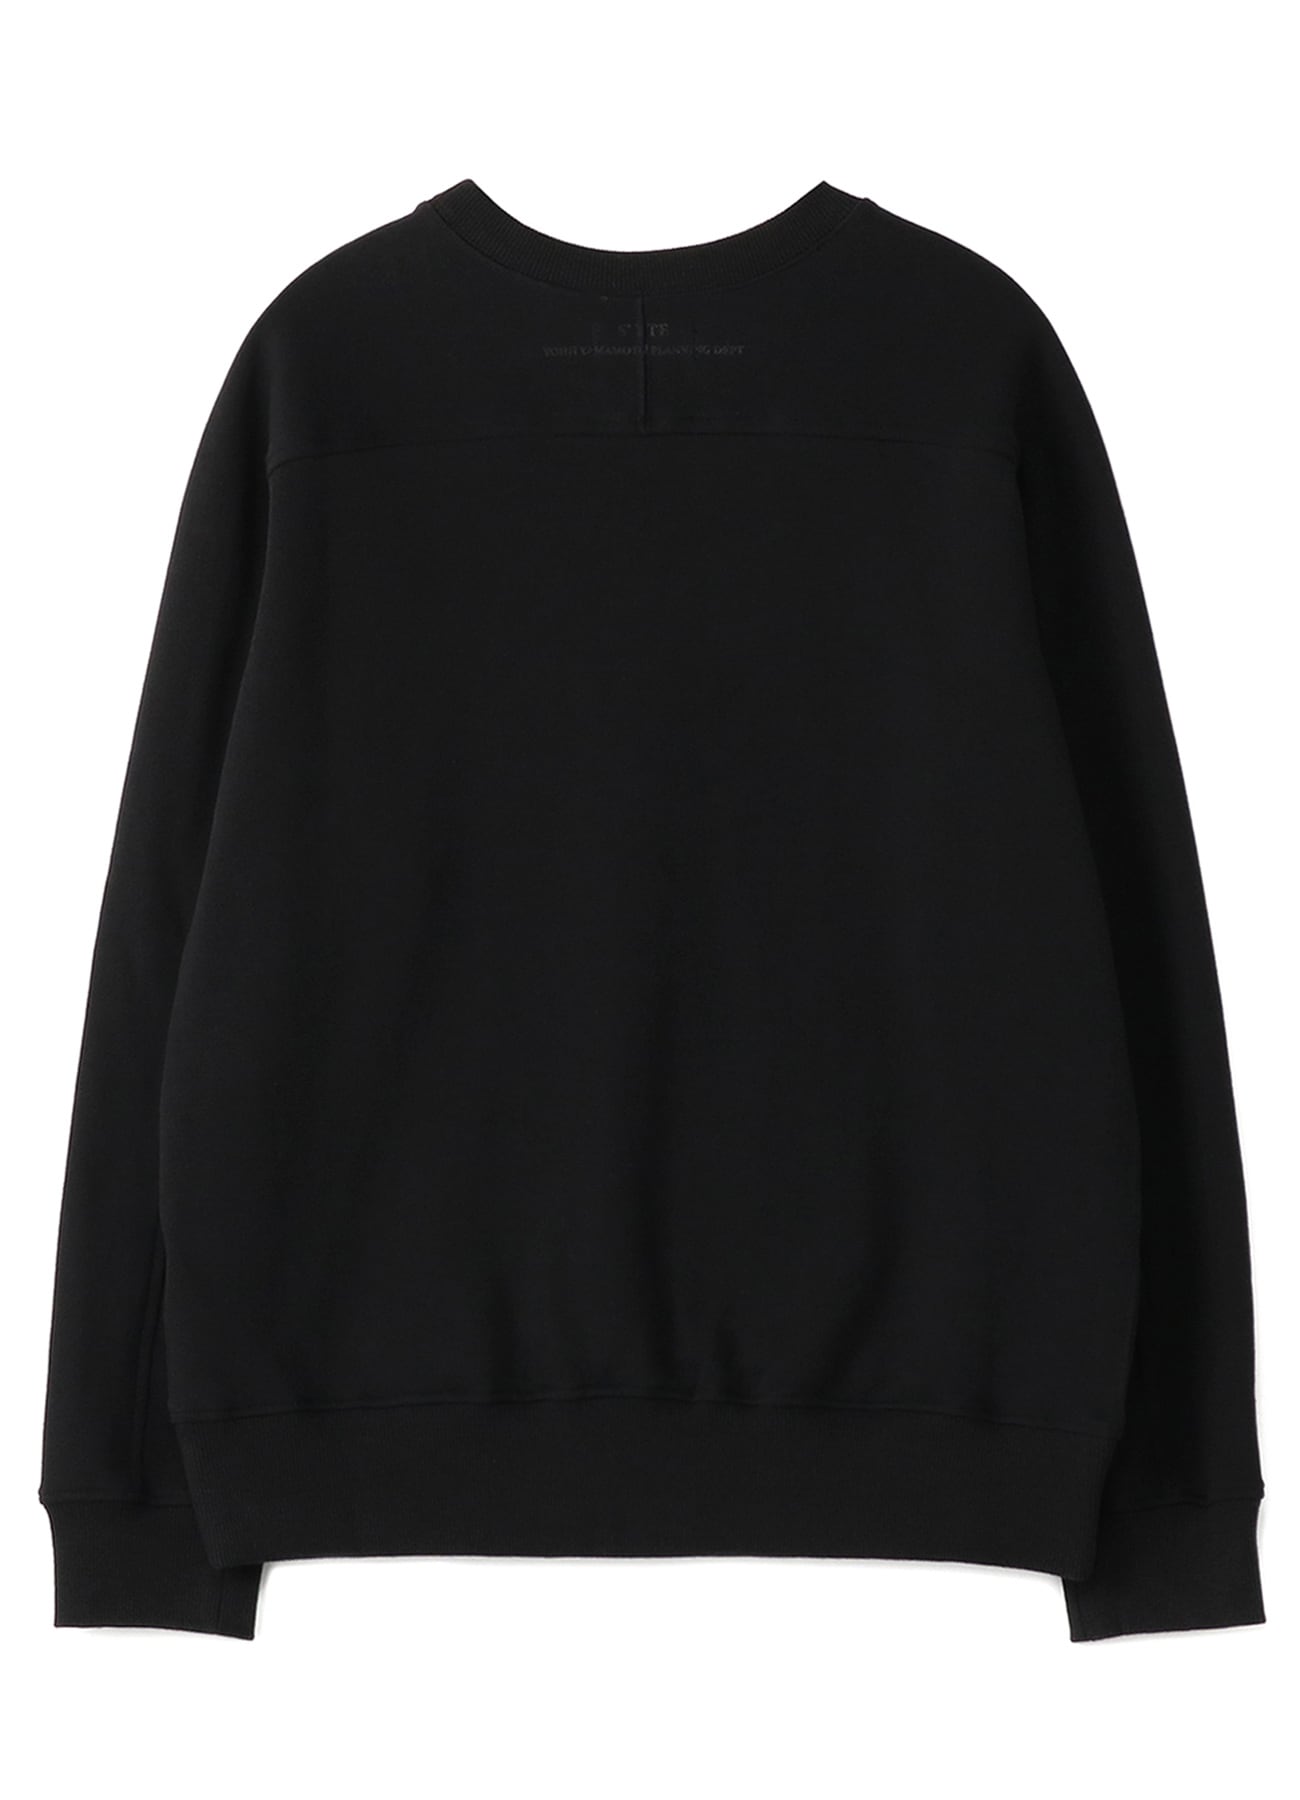 French Terry Stitch Work Front「Black is Modest」Message Crewneck Pullover